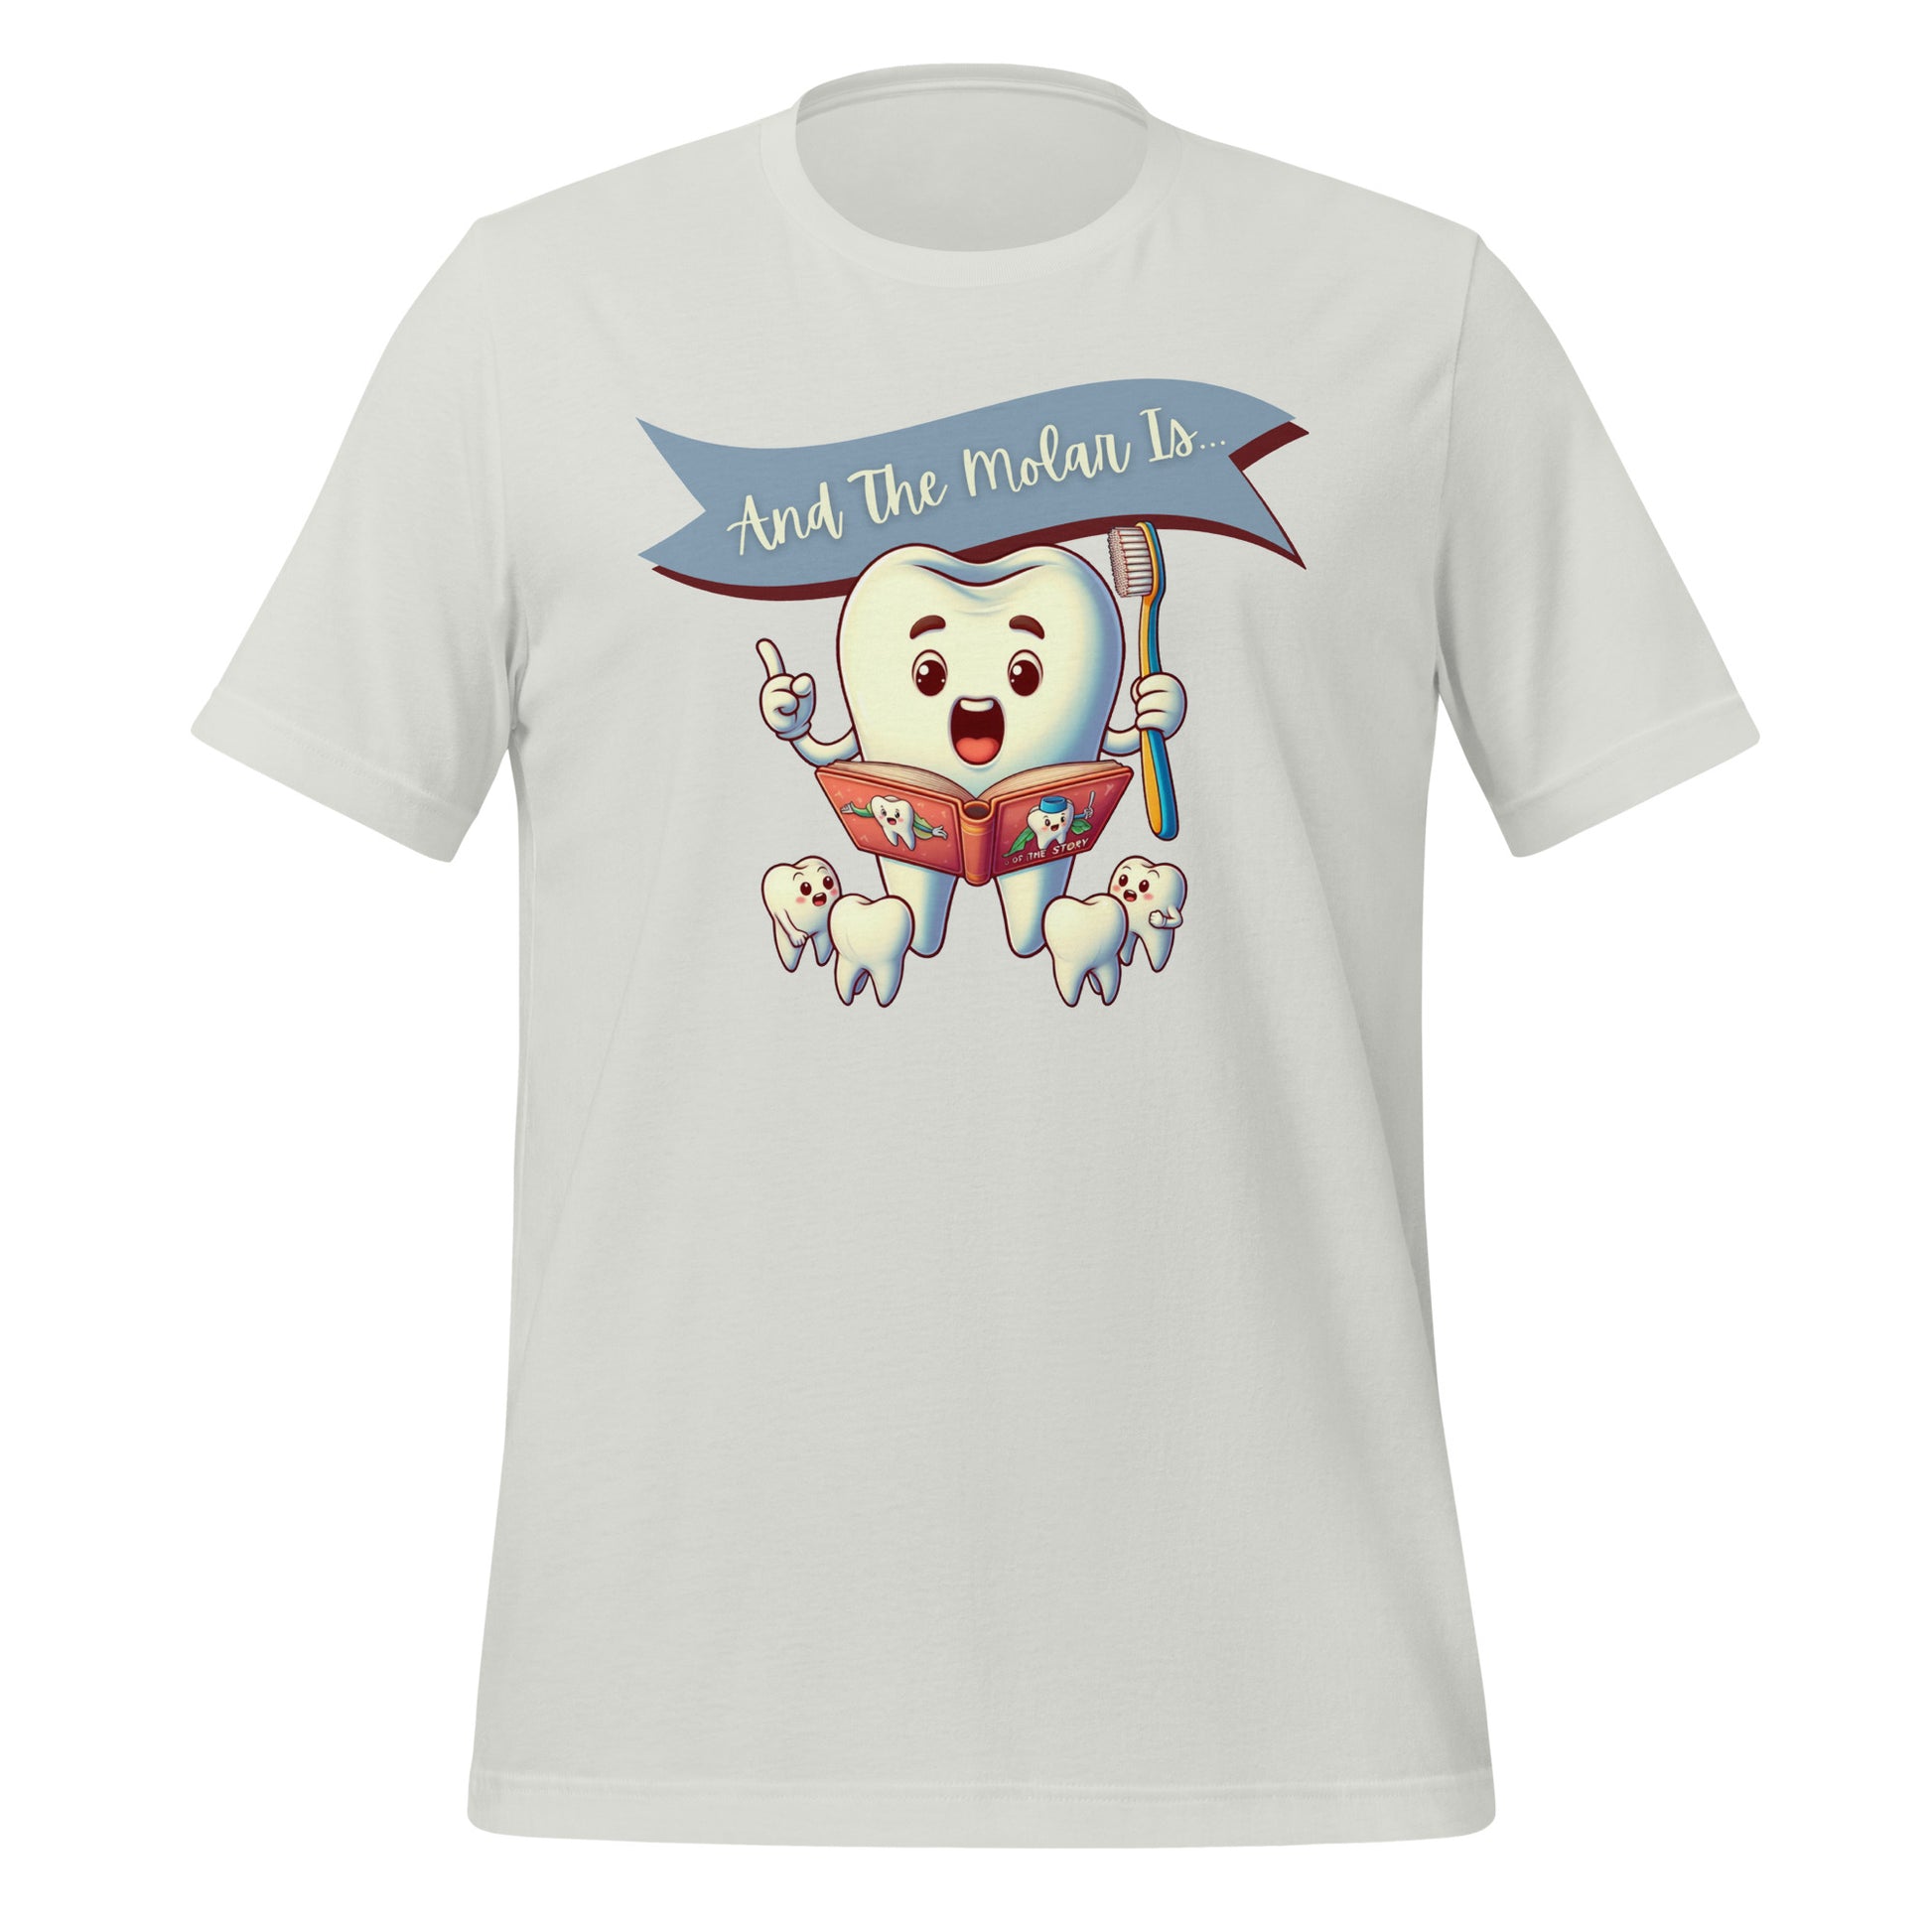 Cute dental shirt featuring a smiling tooth character reading a book with the caption ‘And The Molar Is,’ surrounded by smaller tooth characters. Silver color.